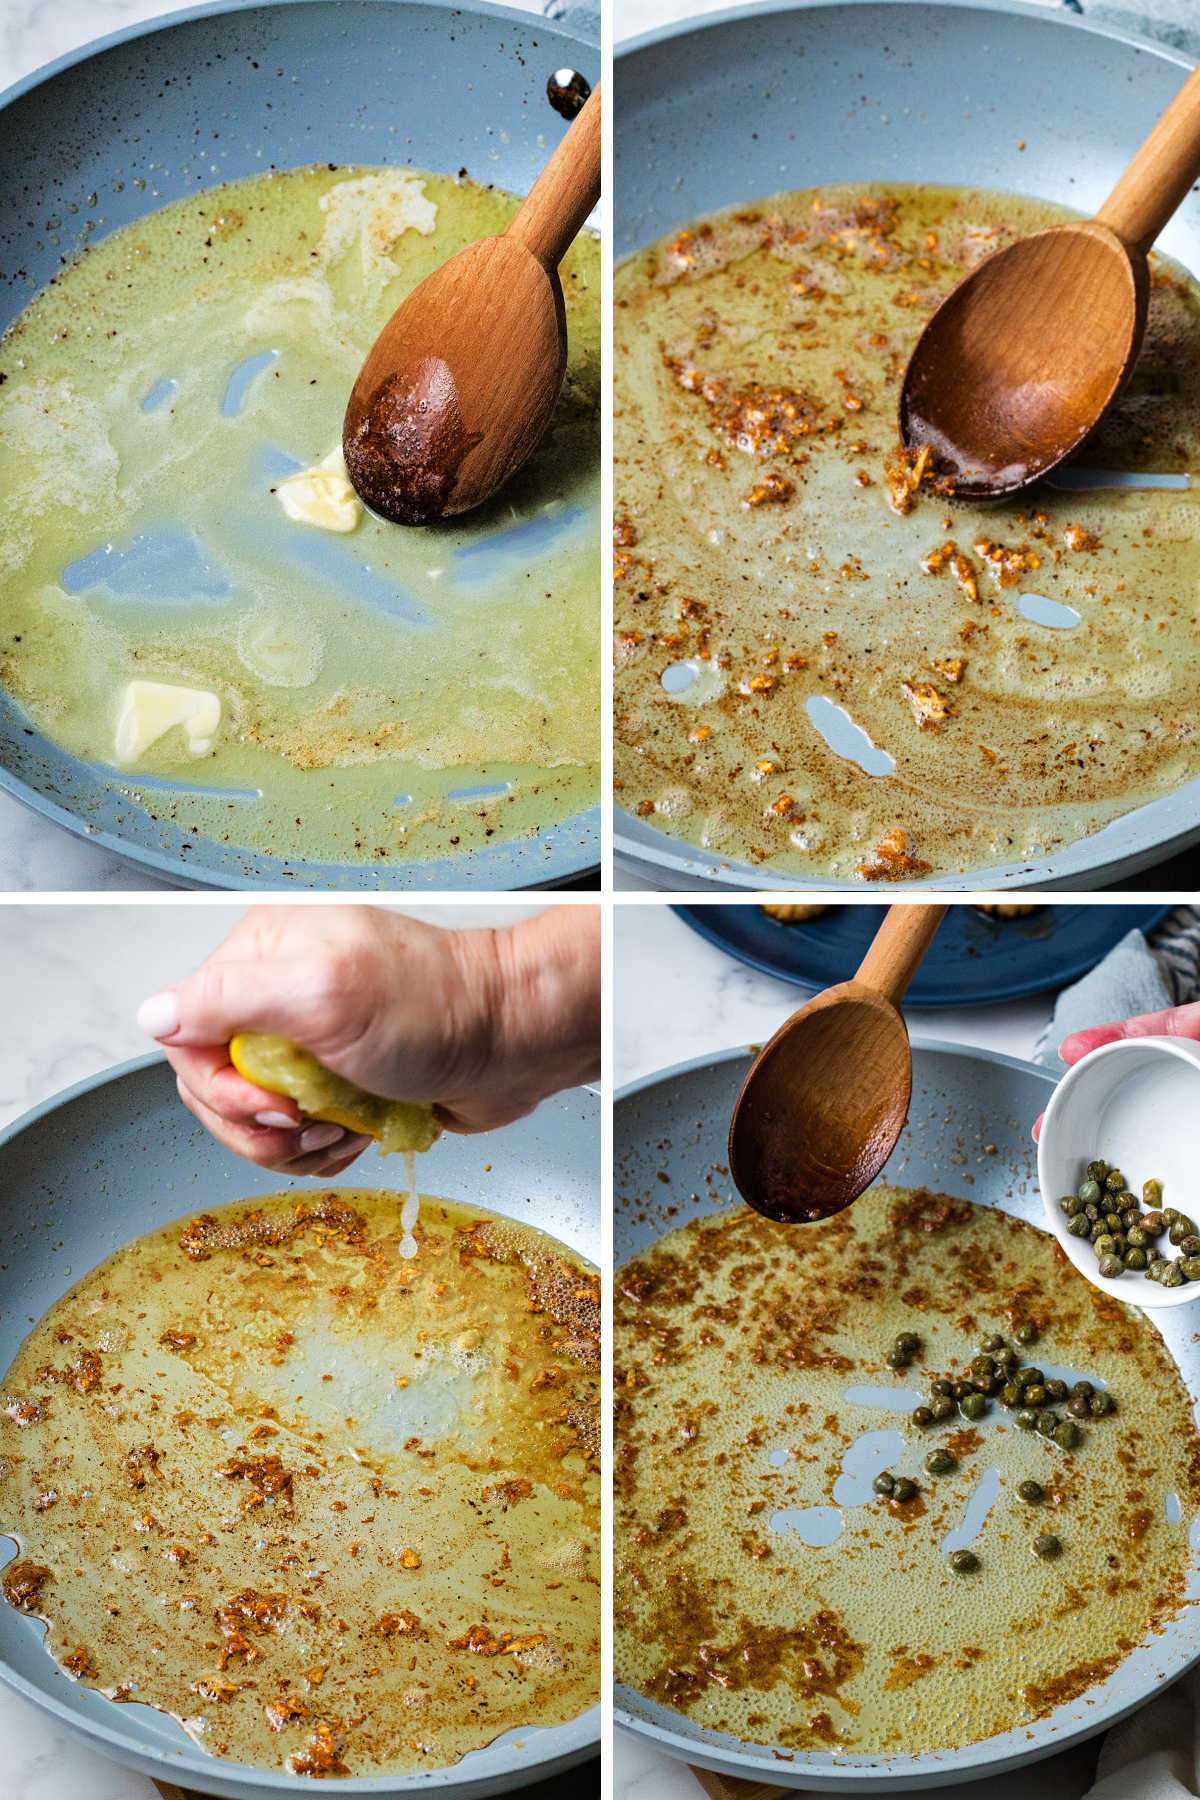 process steps for making brown butter sauce: melt butter in pan; saute garlic; squeeze in lemon juice; add capers.